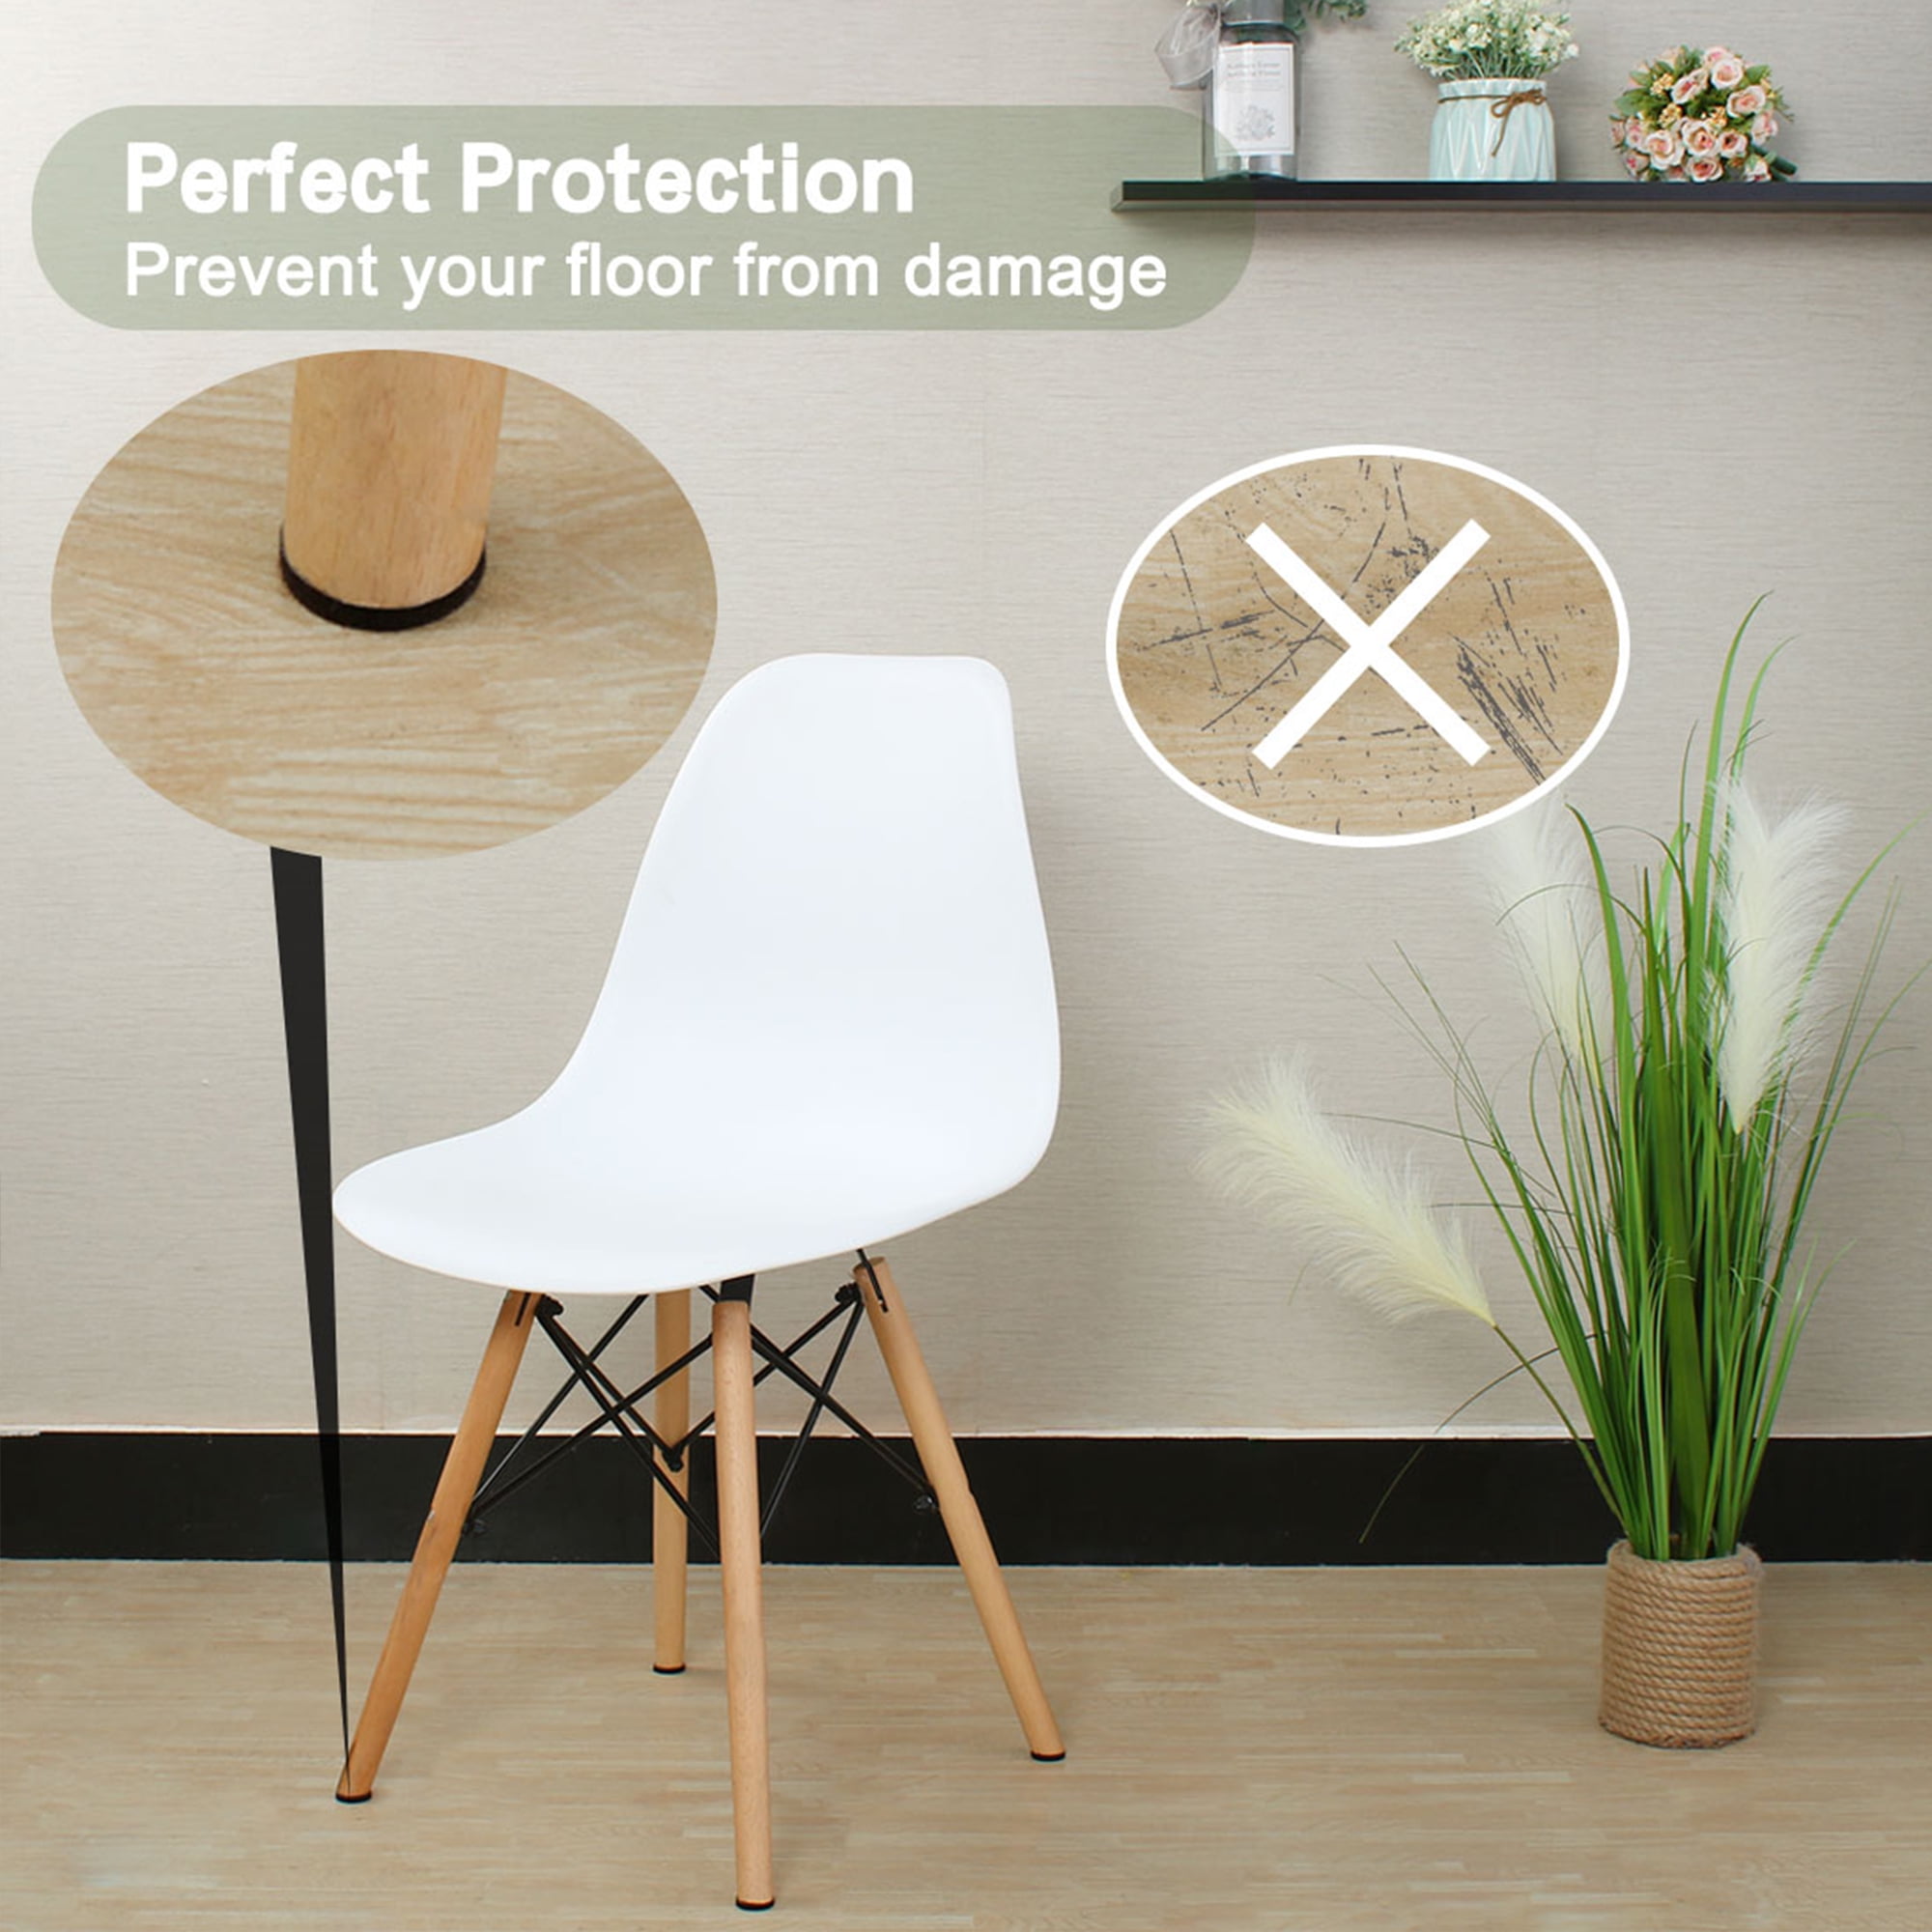 Details about   Silicone Furniture Leg Protection Cover-Table/Chair Feet Pad Floor Protectors 